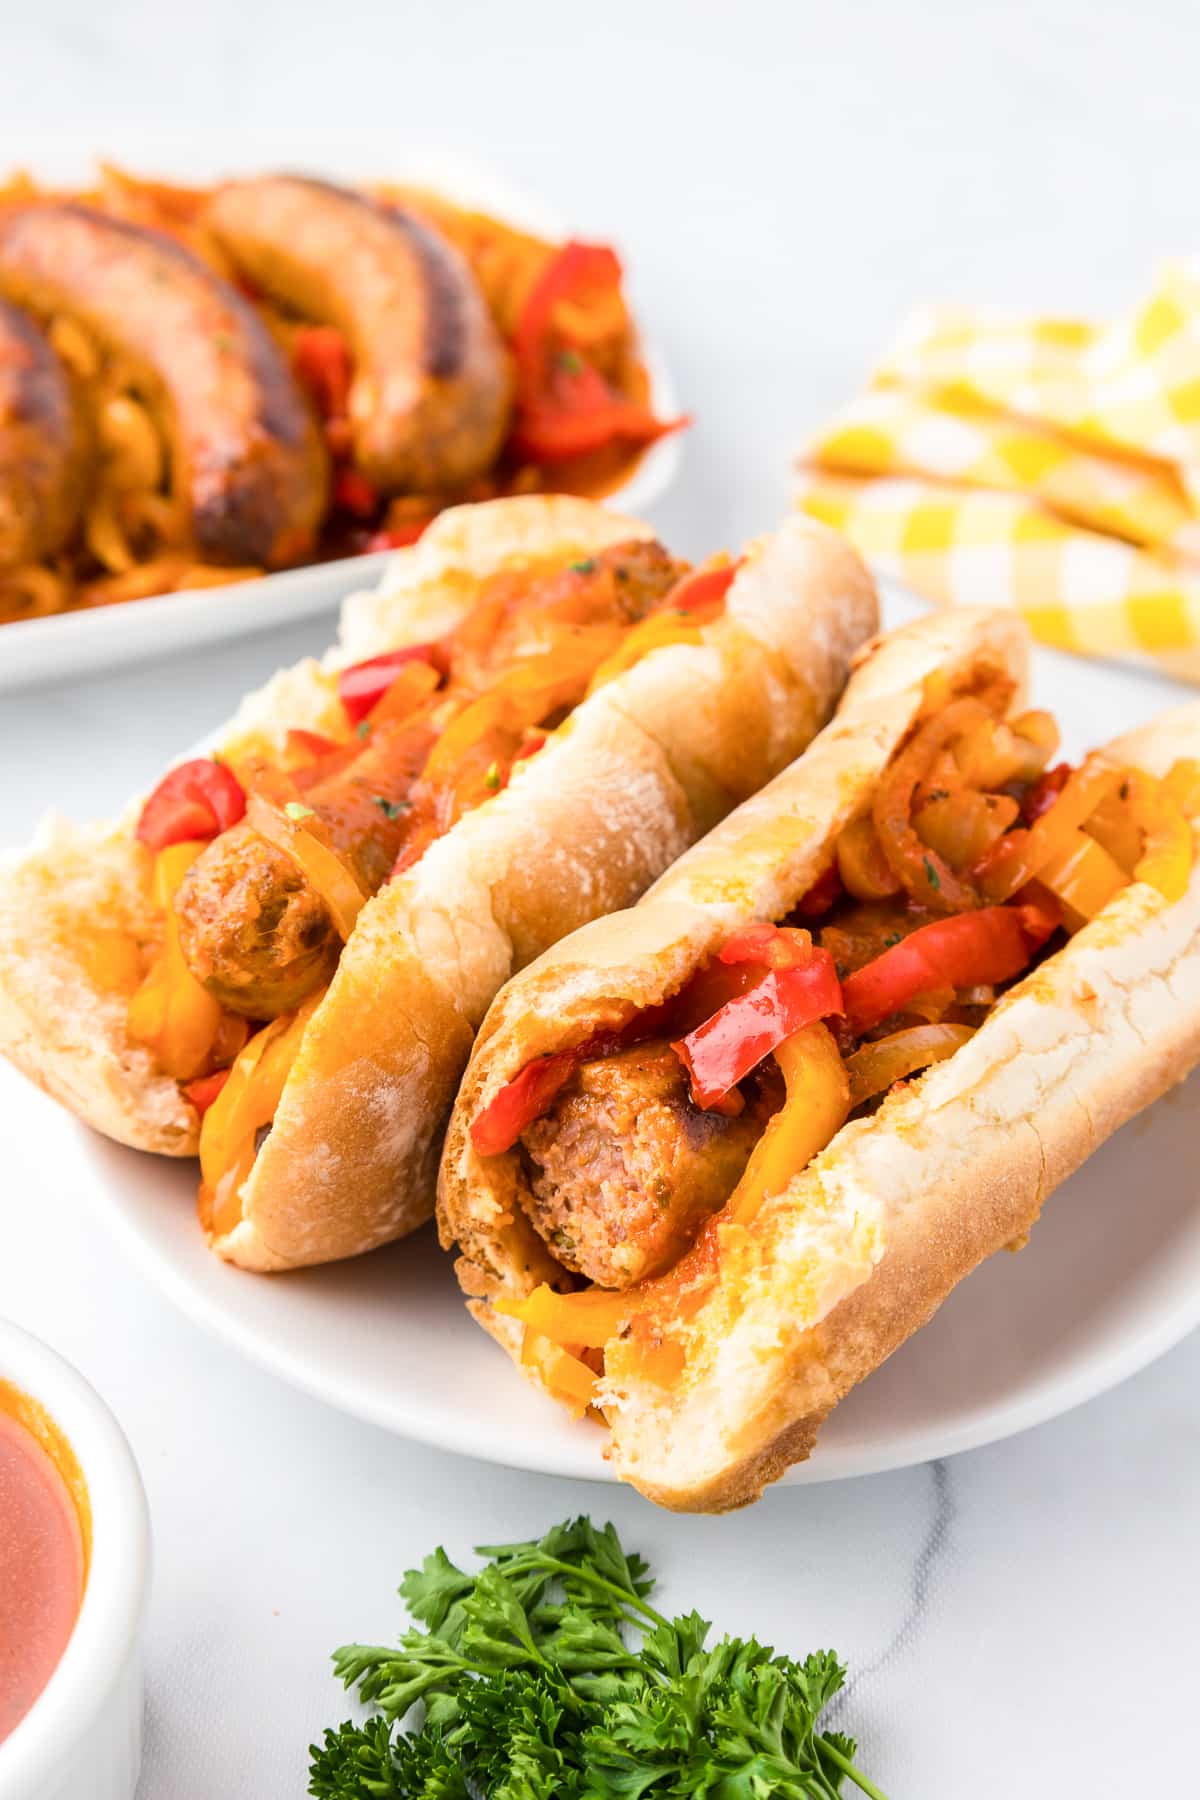 A plate with two Italian sausages on buns topped with pepper and onions with one sausage missing a bite.